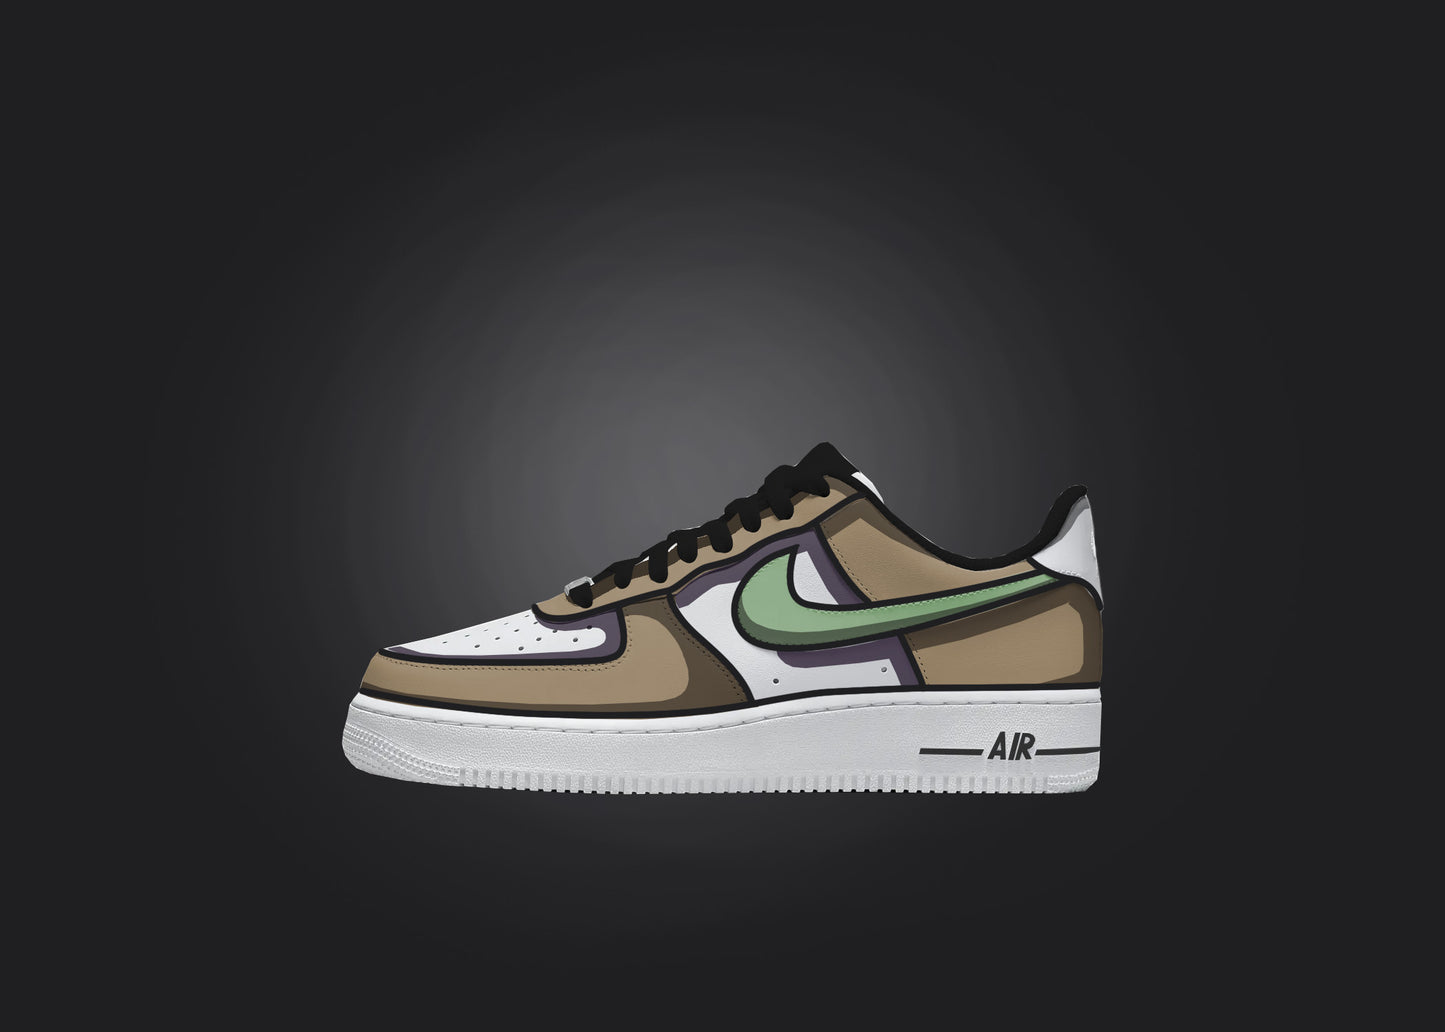 Single brown and green Custom Air Force 1 sneaker displayed against a black background, accentuating its unique cartoon shading technique.